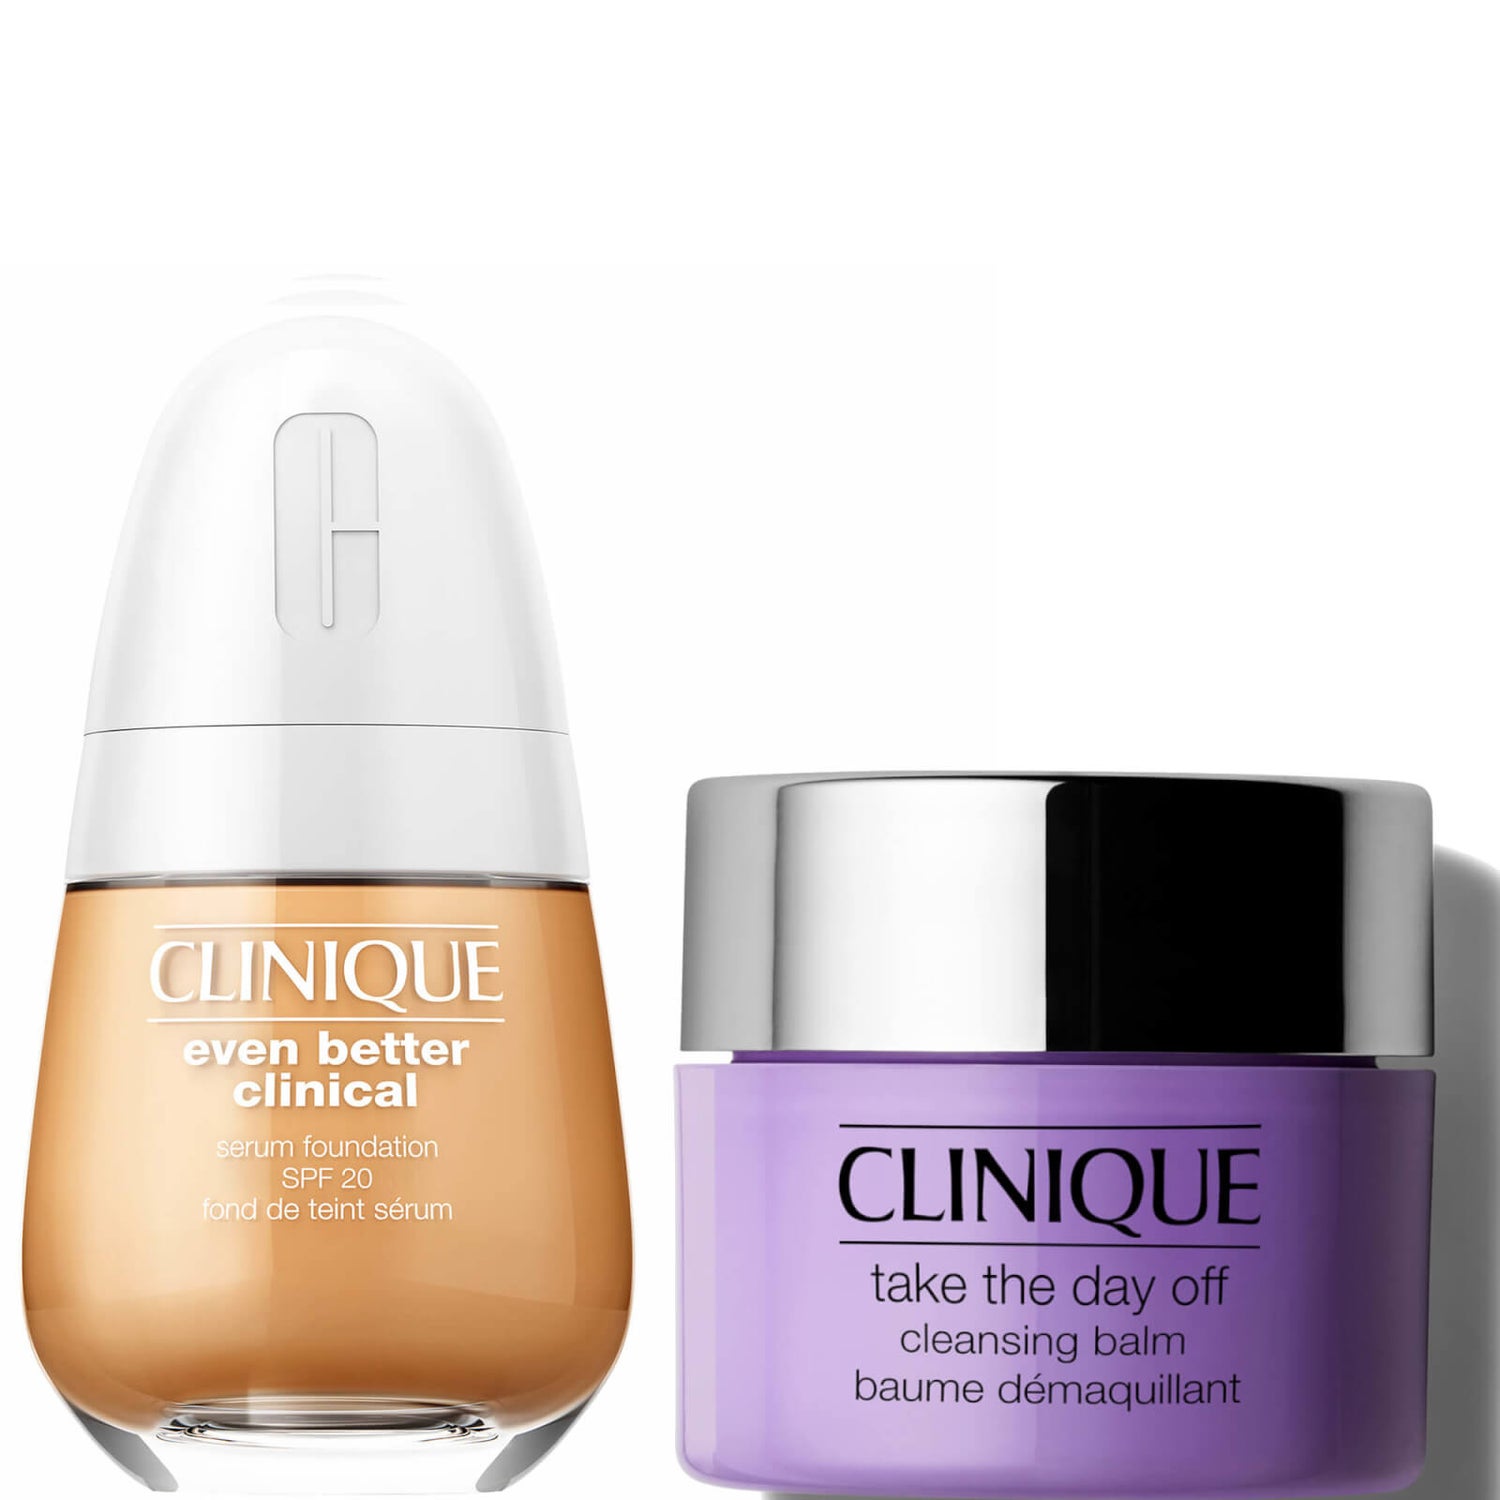 Clinique Hero Moment Even Better Clinical Serum and Foundation Bundle (Various Shades) (Worth 56.00€)